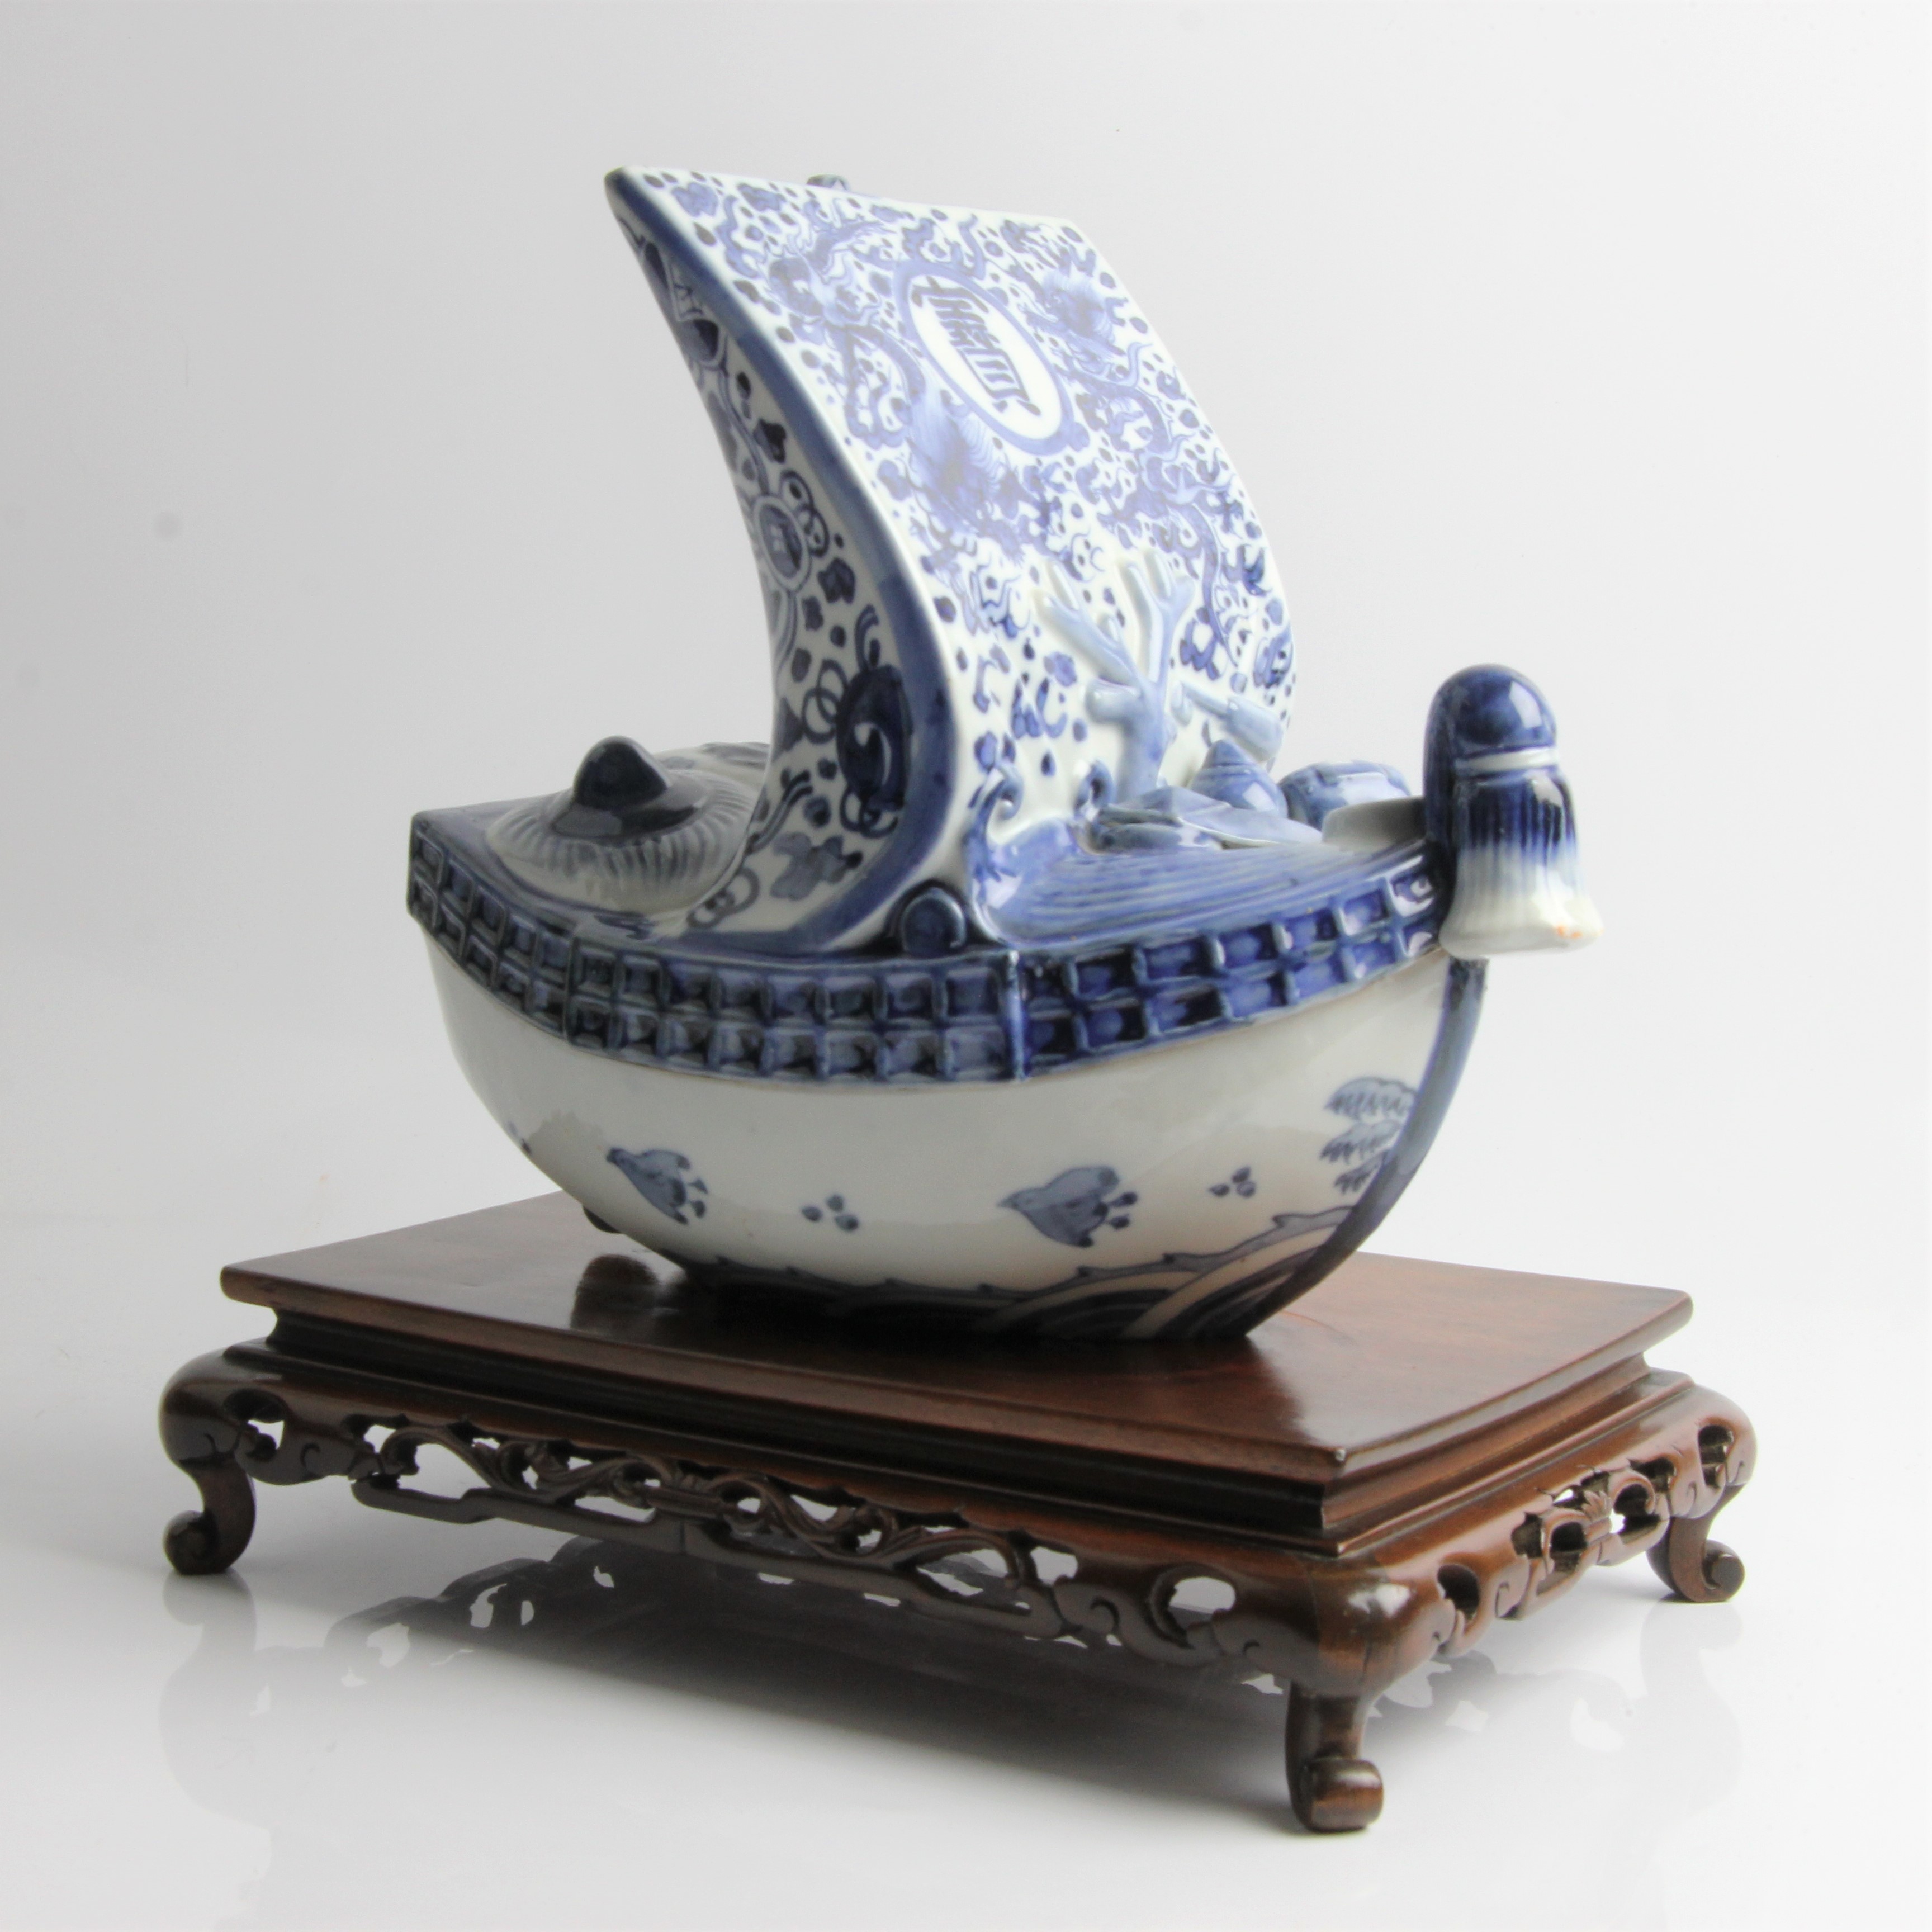 A Chinese blue and white ceramic sailing ship in two parts, decorated with dragons and character